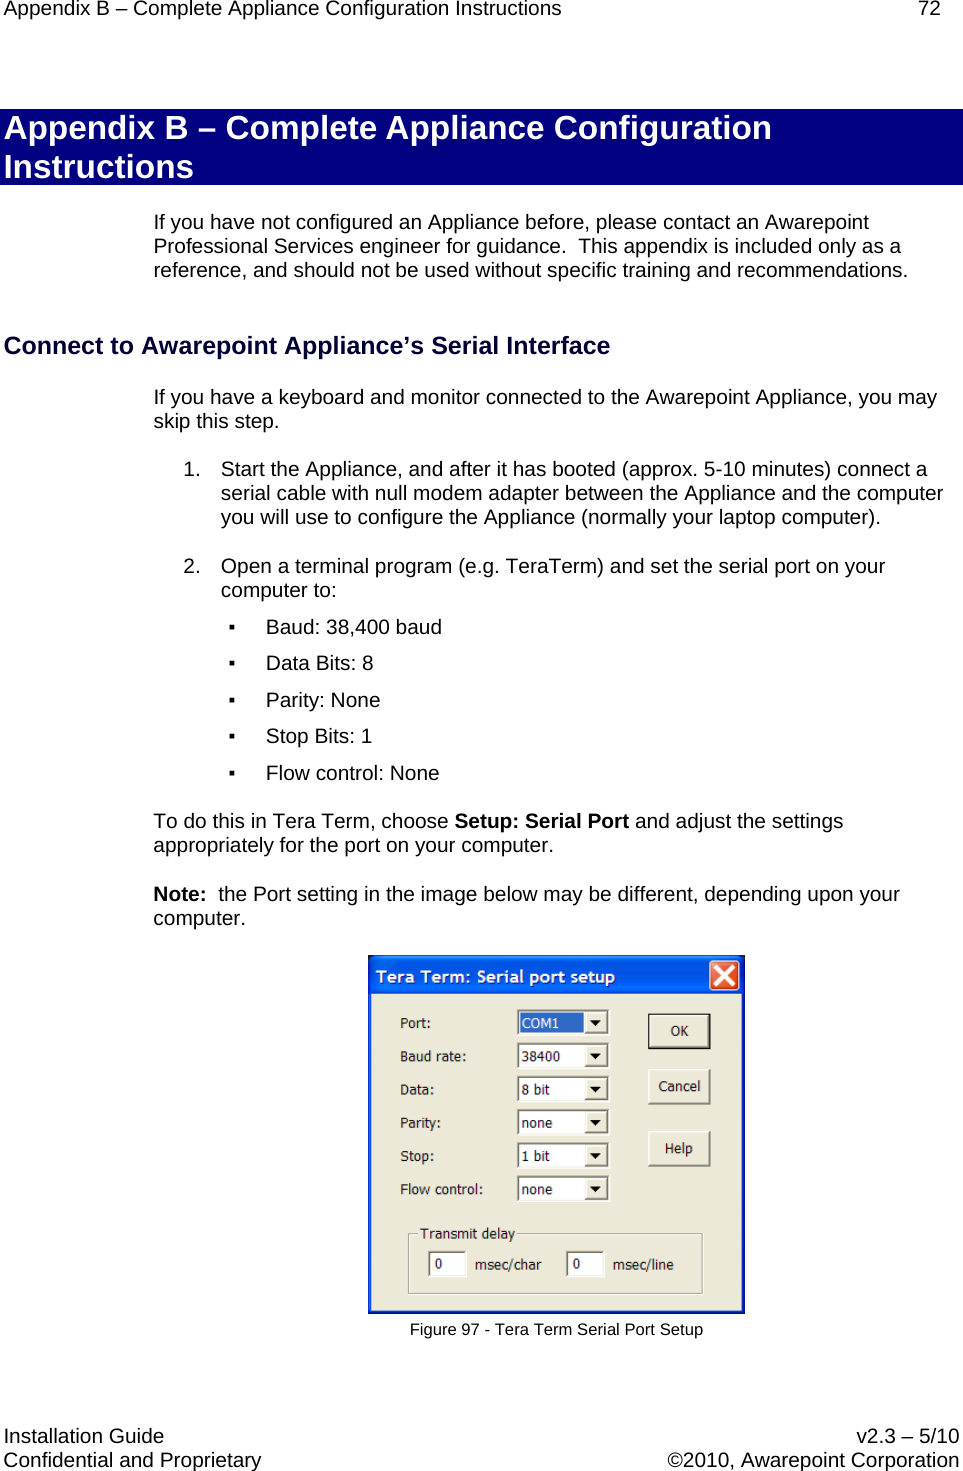 Appendix B – Complete Appliance Configuration Instructions    72  Installation Guide    v2.3 – 5/10 Confidential and Proprietary    ©2010, Awarepoint Corporation  Appendix B – Complete Appliance Configuration Instructions If you have not configured an Appliance before, please contact an Awarepoint Professional Services engineer for guidance.  This appendix is included only as a reference, and should not be used without specific training and recommendations.  Connect to Awarepoint Appliance’s Serial Interface If you have a keyboard and monitor connected to the Awarepoint Appliance, you may skip this step. 1. Start the Appliance, and after it has booted (approx. 5-10 minutes) connect a serial cable with null modem adapter between the Appliance and the computer you will use to configure the Appliance (normally your laptop computer). 2. Open a terminal program (e.g. TeraTerm) and set the serial port on your computer to: ▪ Baud: 38,400 baud ▪ Data Bits: 8 ▪ Parity: None ▪ Stop Bits: 1 ▪ Flow control: None To do this in Tera Term, choose Setup: Serial Port and adjust the settings appropriately for the port on your computer.  Note:  the Port setting in the image below may be different, depending upon your computer.  Figure 97 - Tera Term Serial Port Setup  